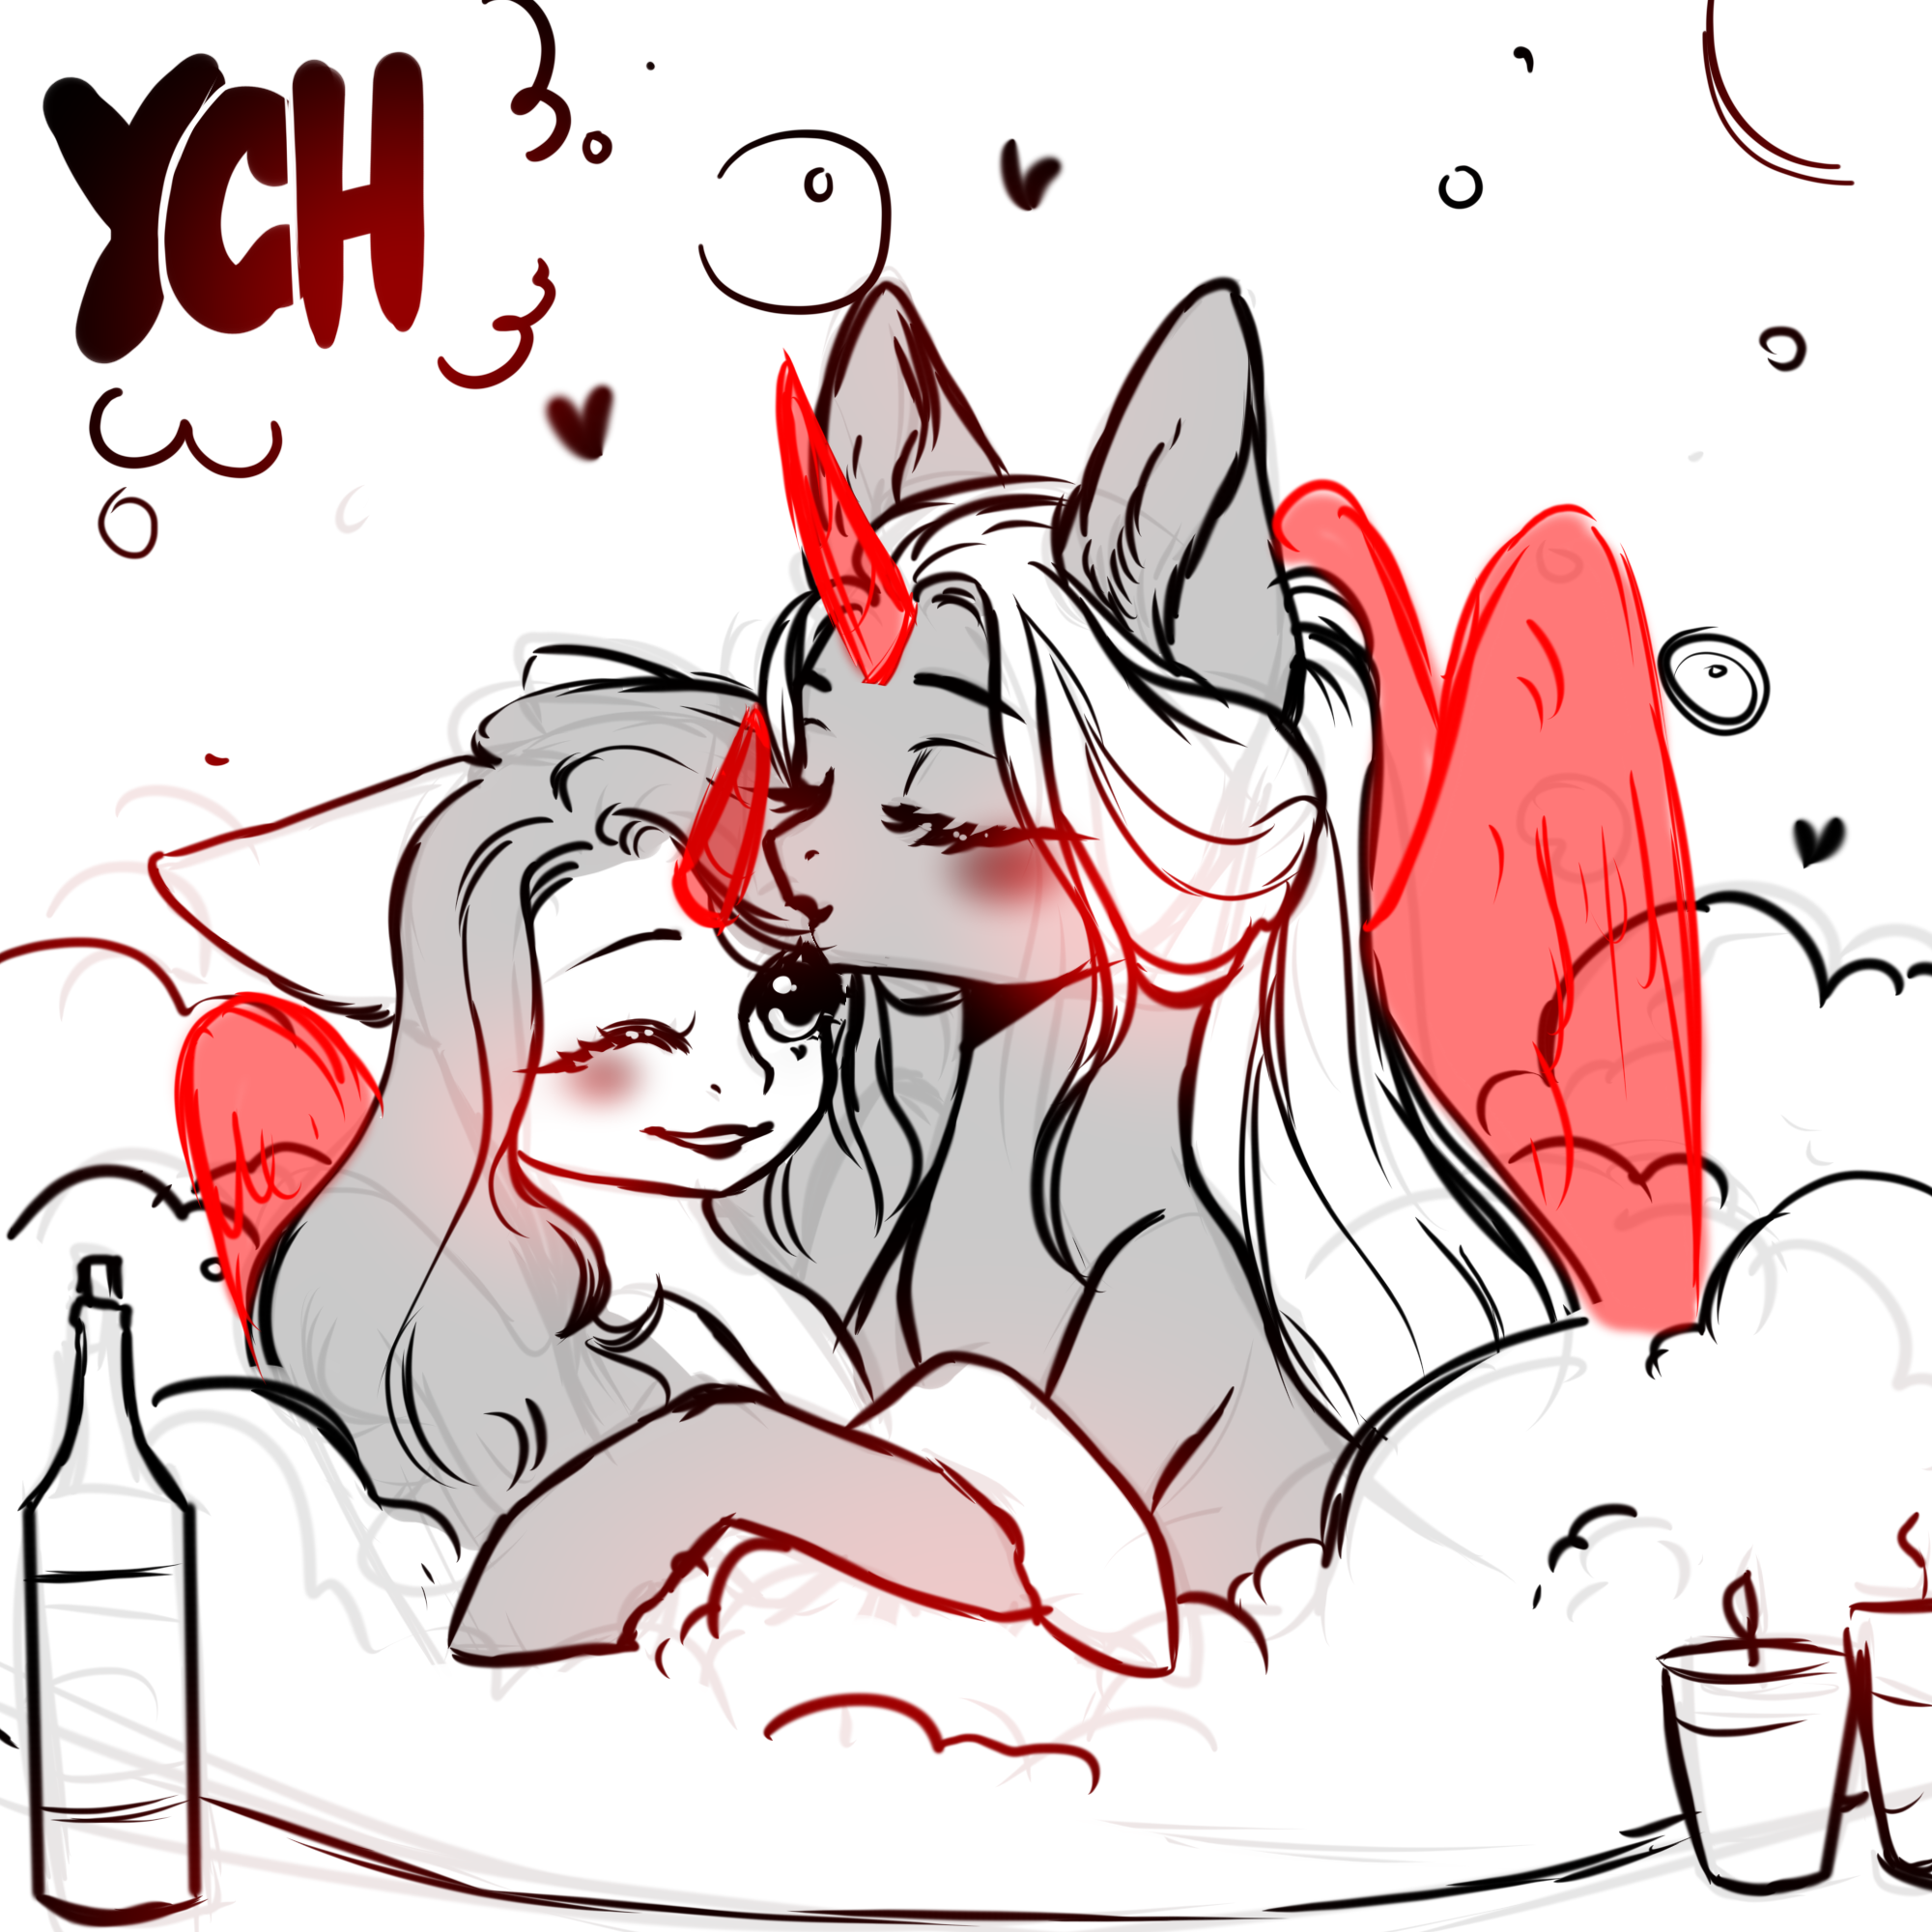 YCH - A Love Evening - YCH.Commishes.